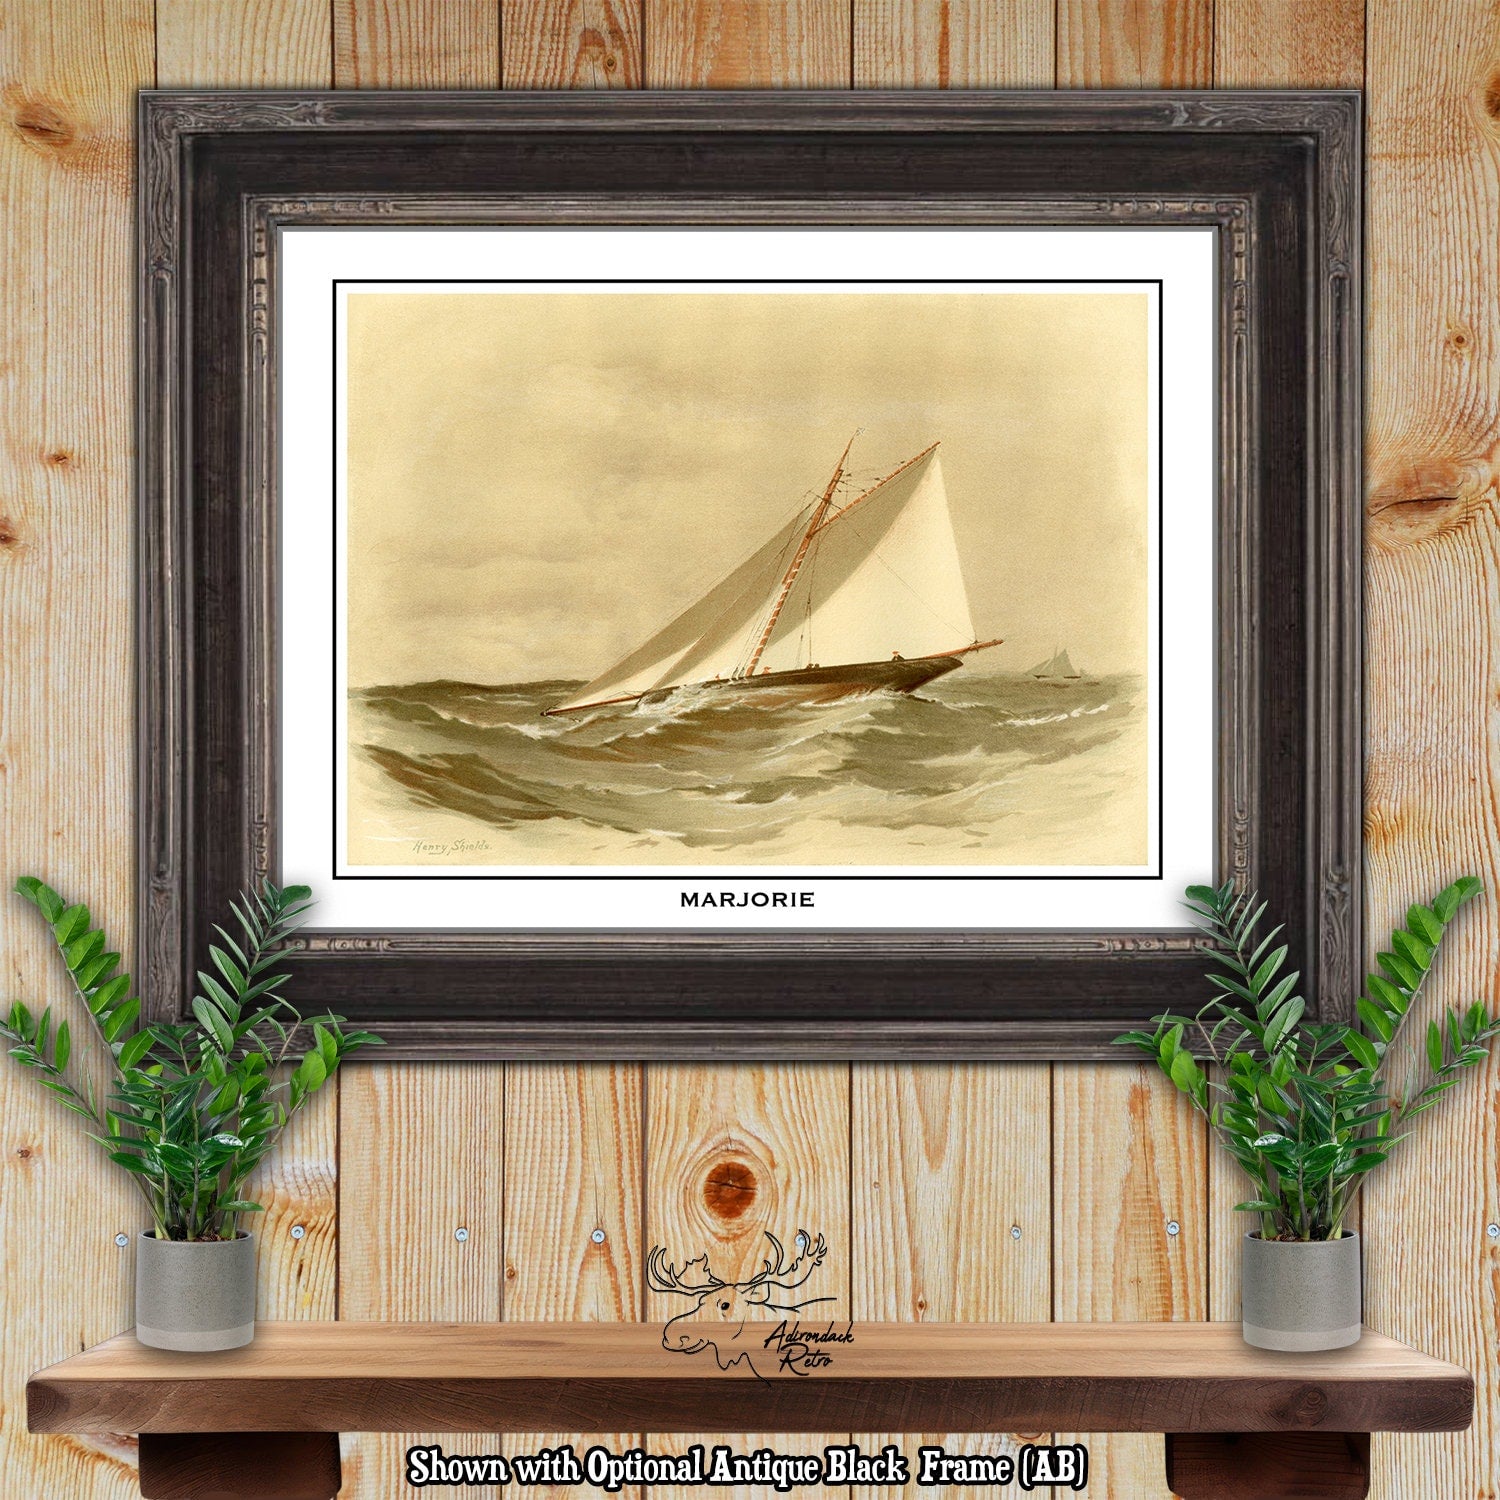 Clyde Yacht Marjorie by Henry Shields Giclee Fine Art Print at Adirondack Retro